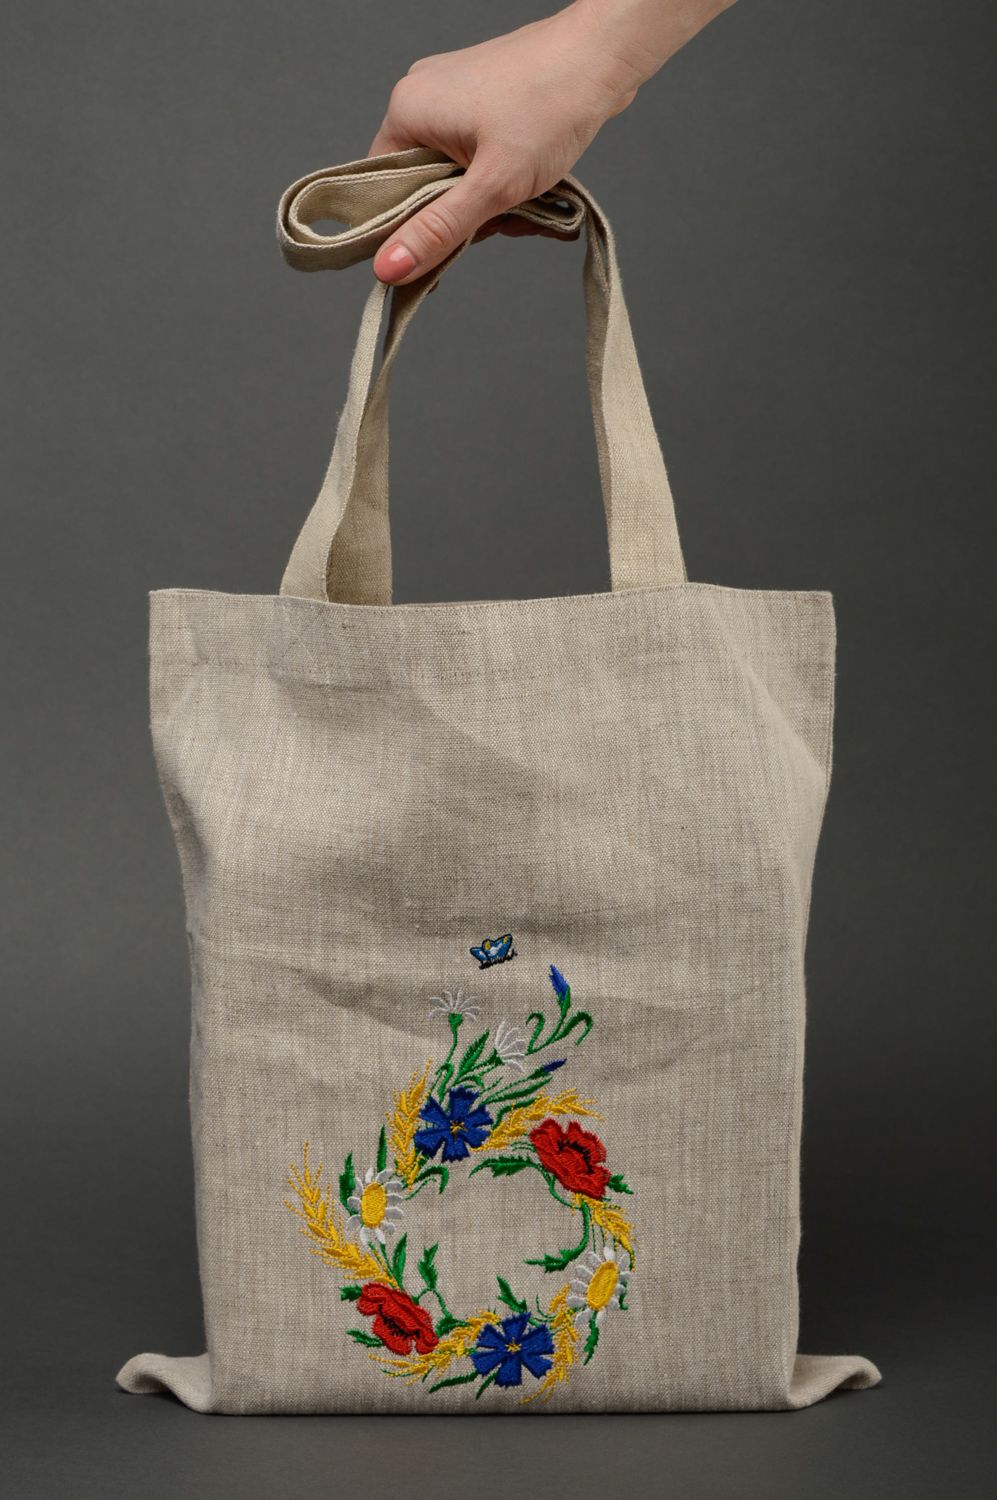 Handmade women's fabric bag with embroidered flowers photo 1